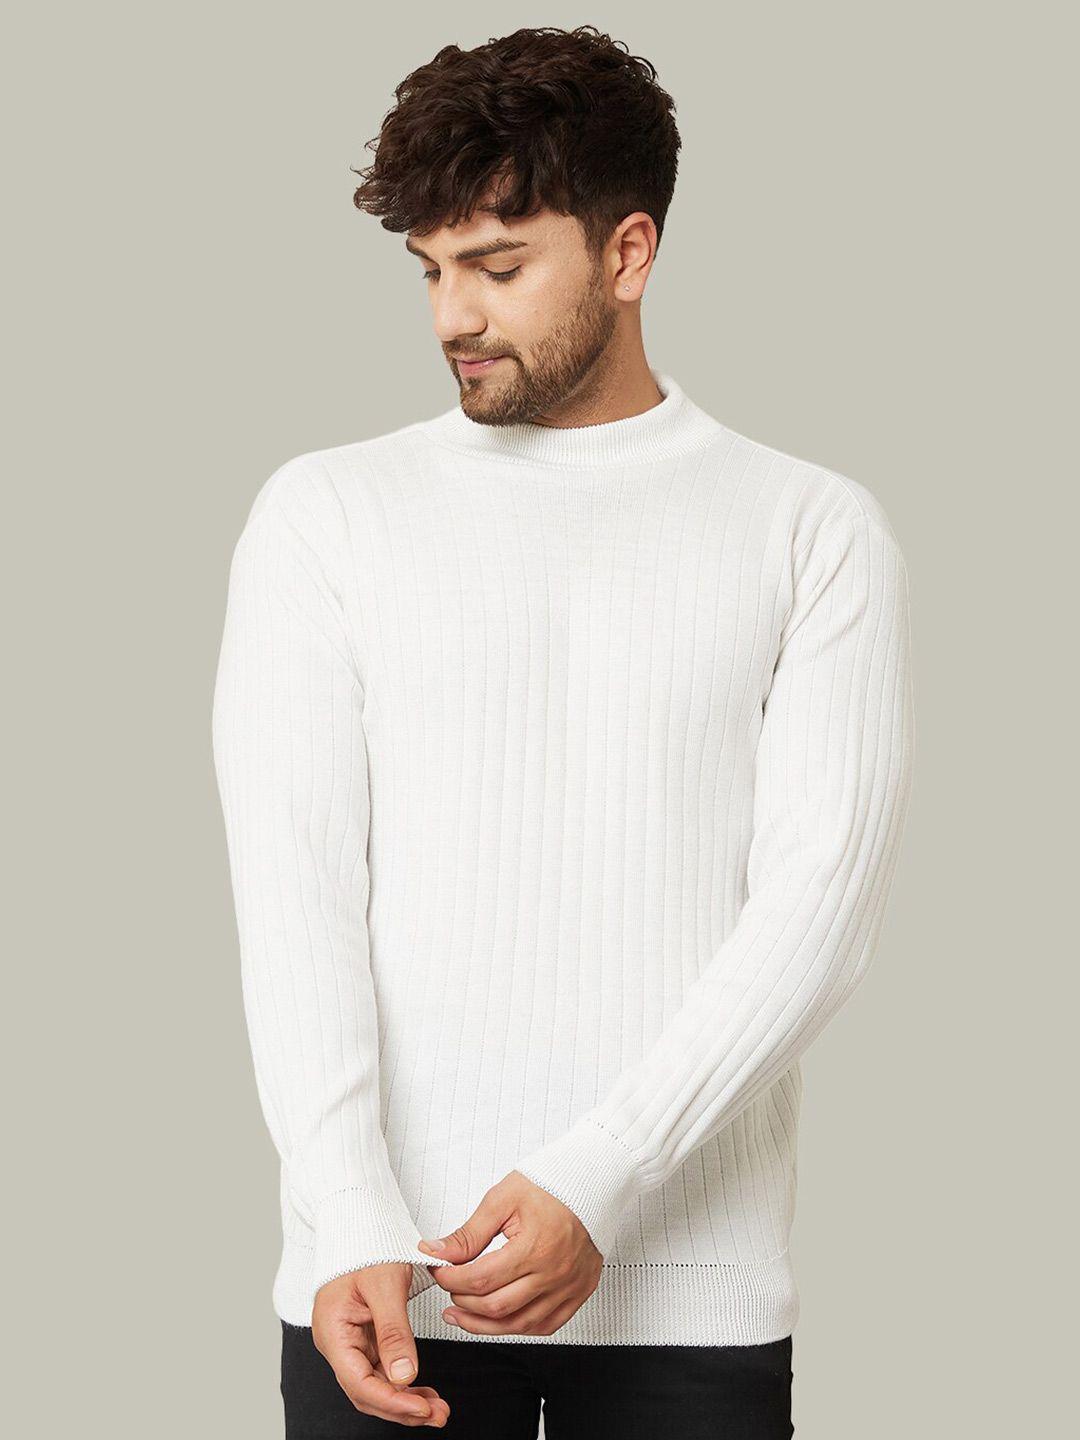 kvetoo high neck long sleeves striped pullover